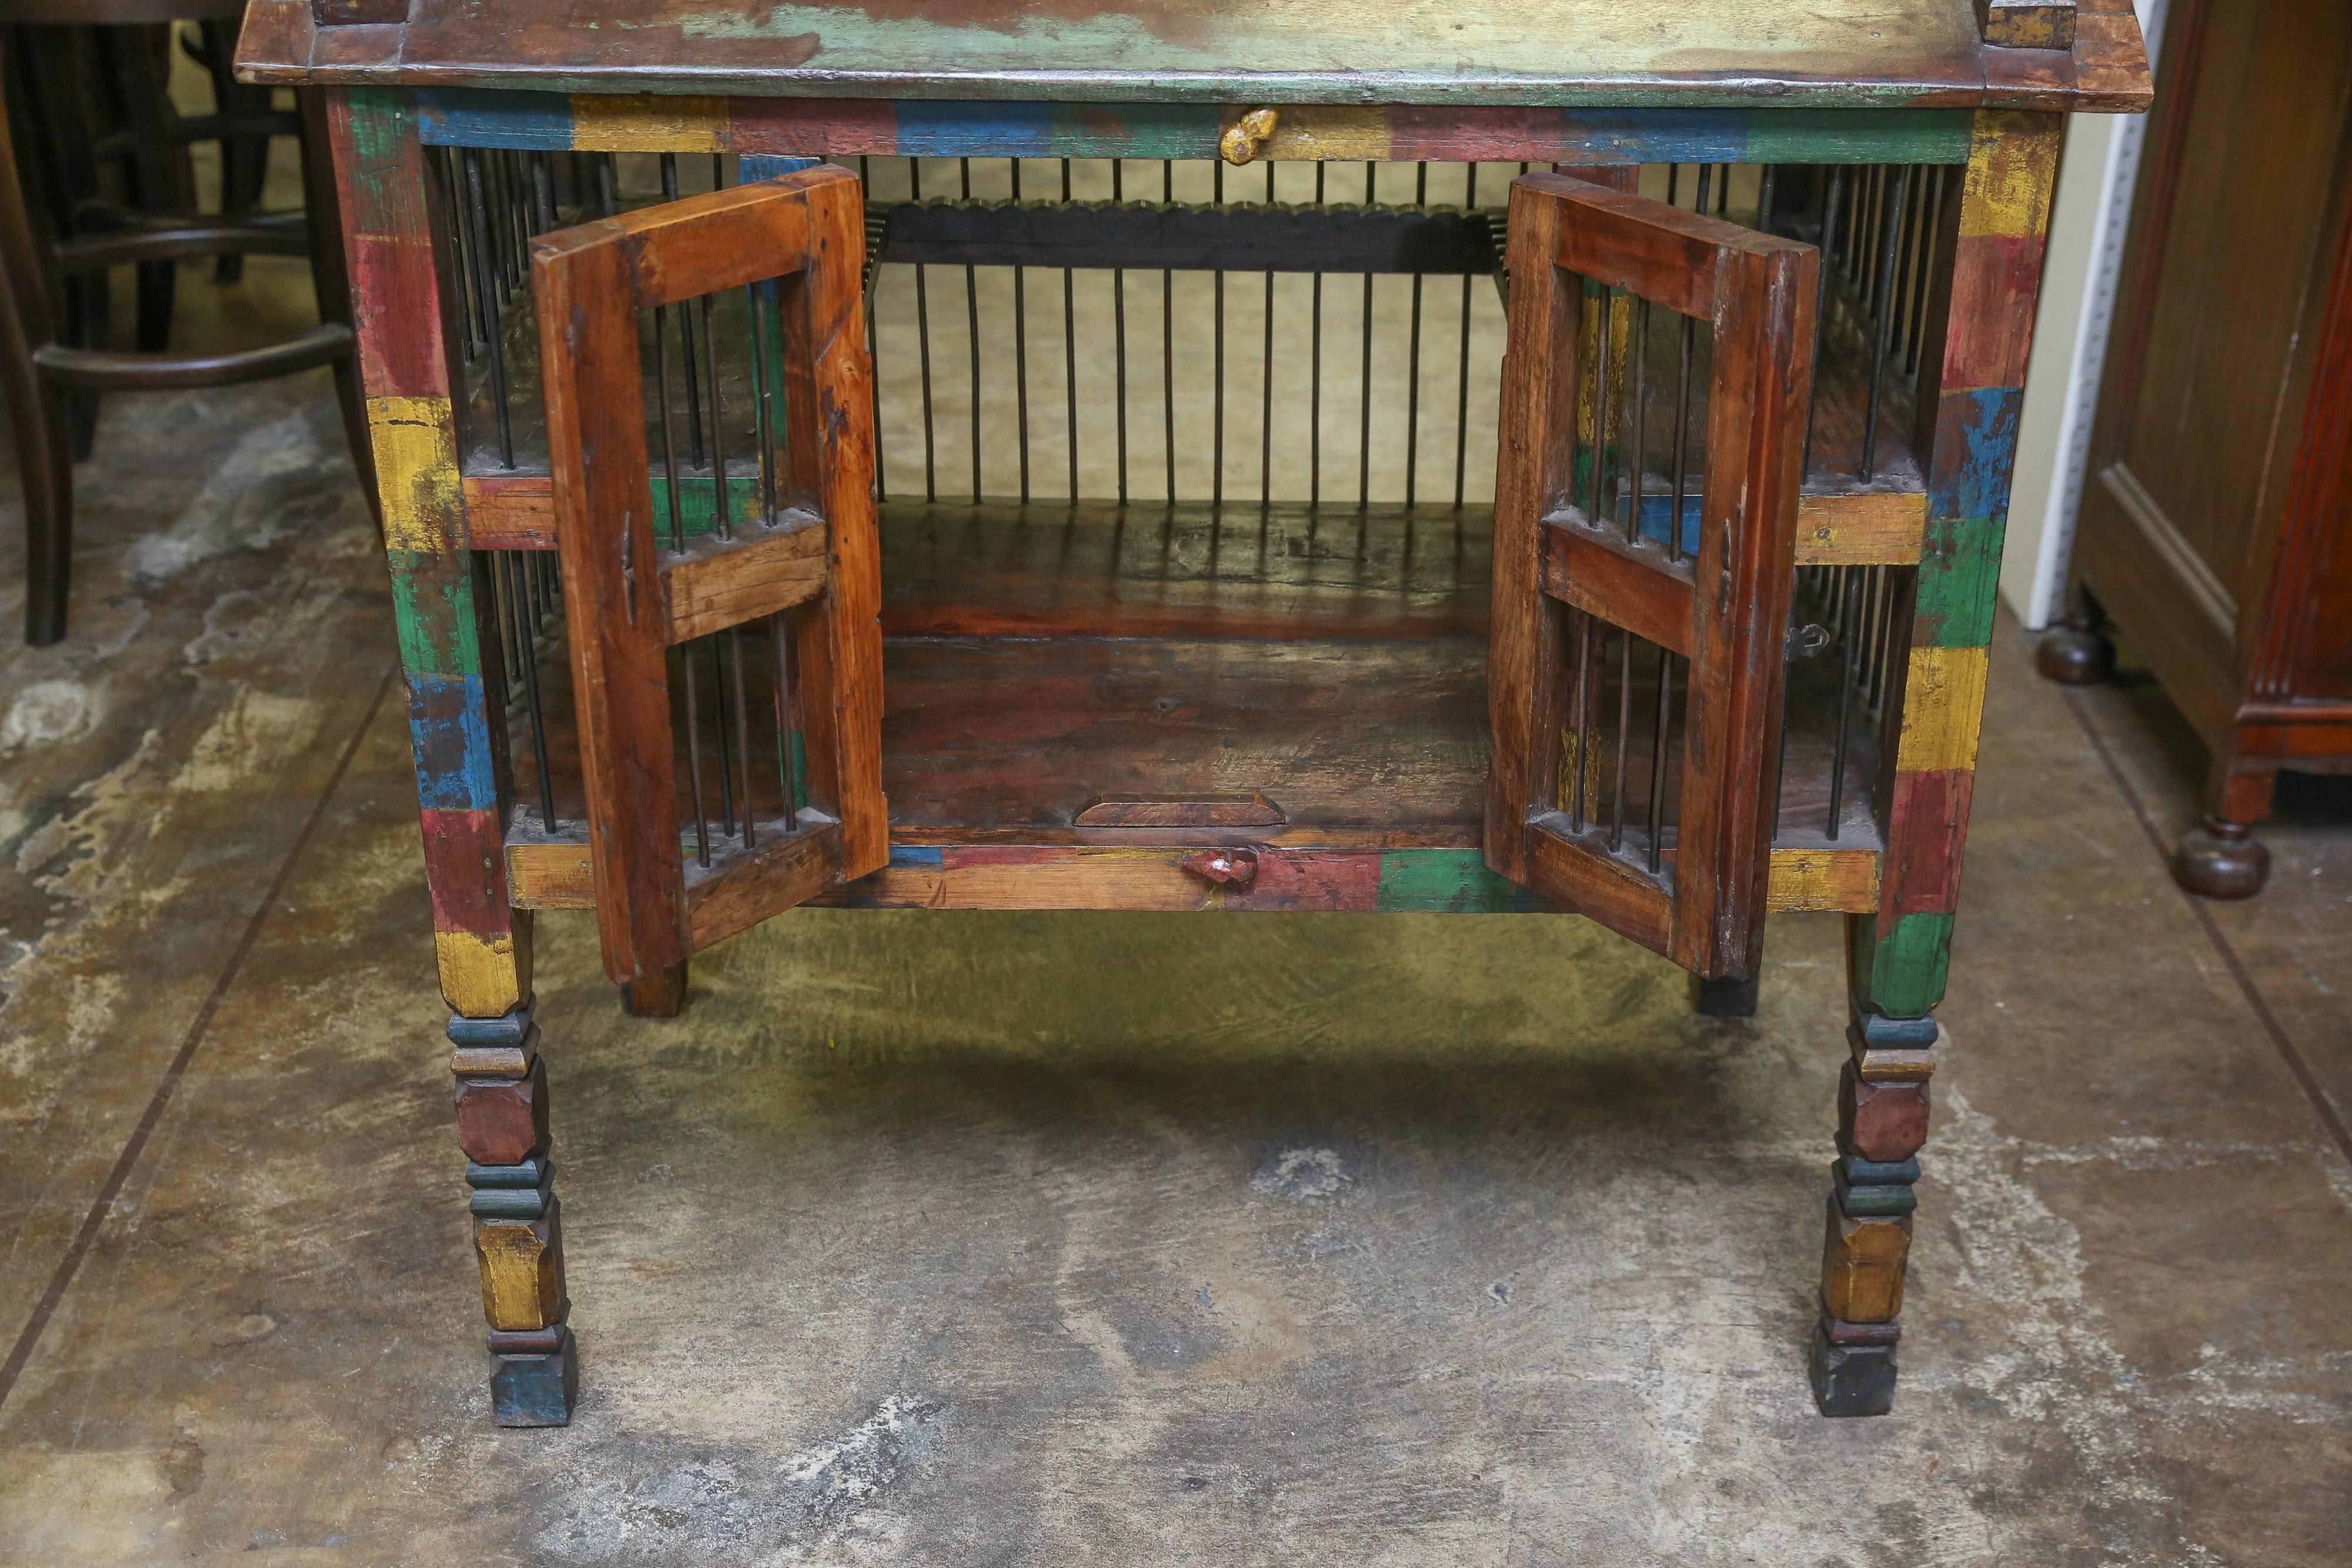 Early 20th Century Antique Teak Wood and Iron Bird Cage from a Community Farm in Central India